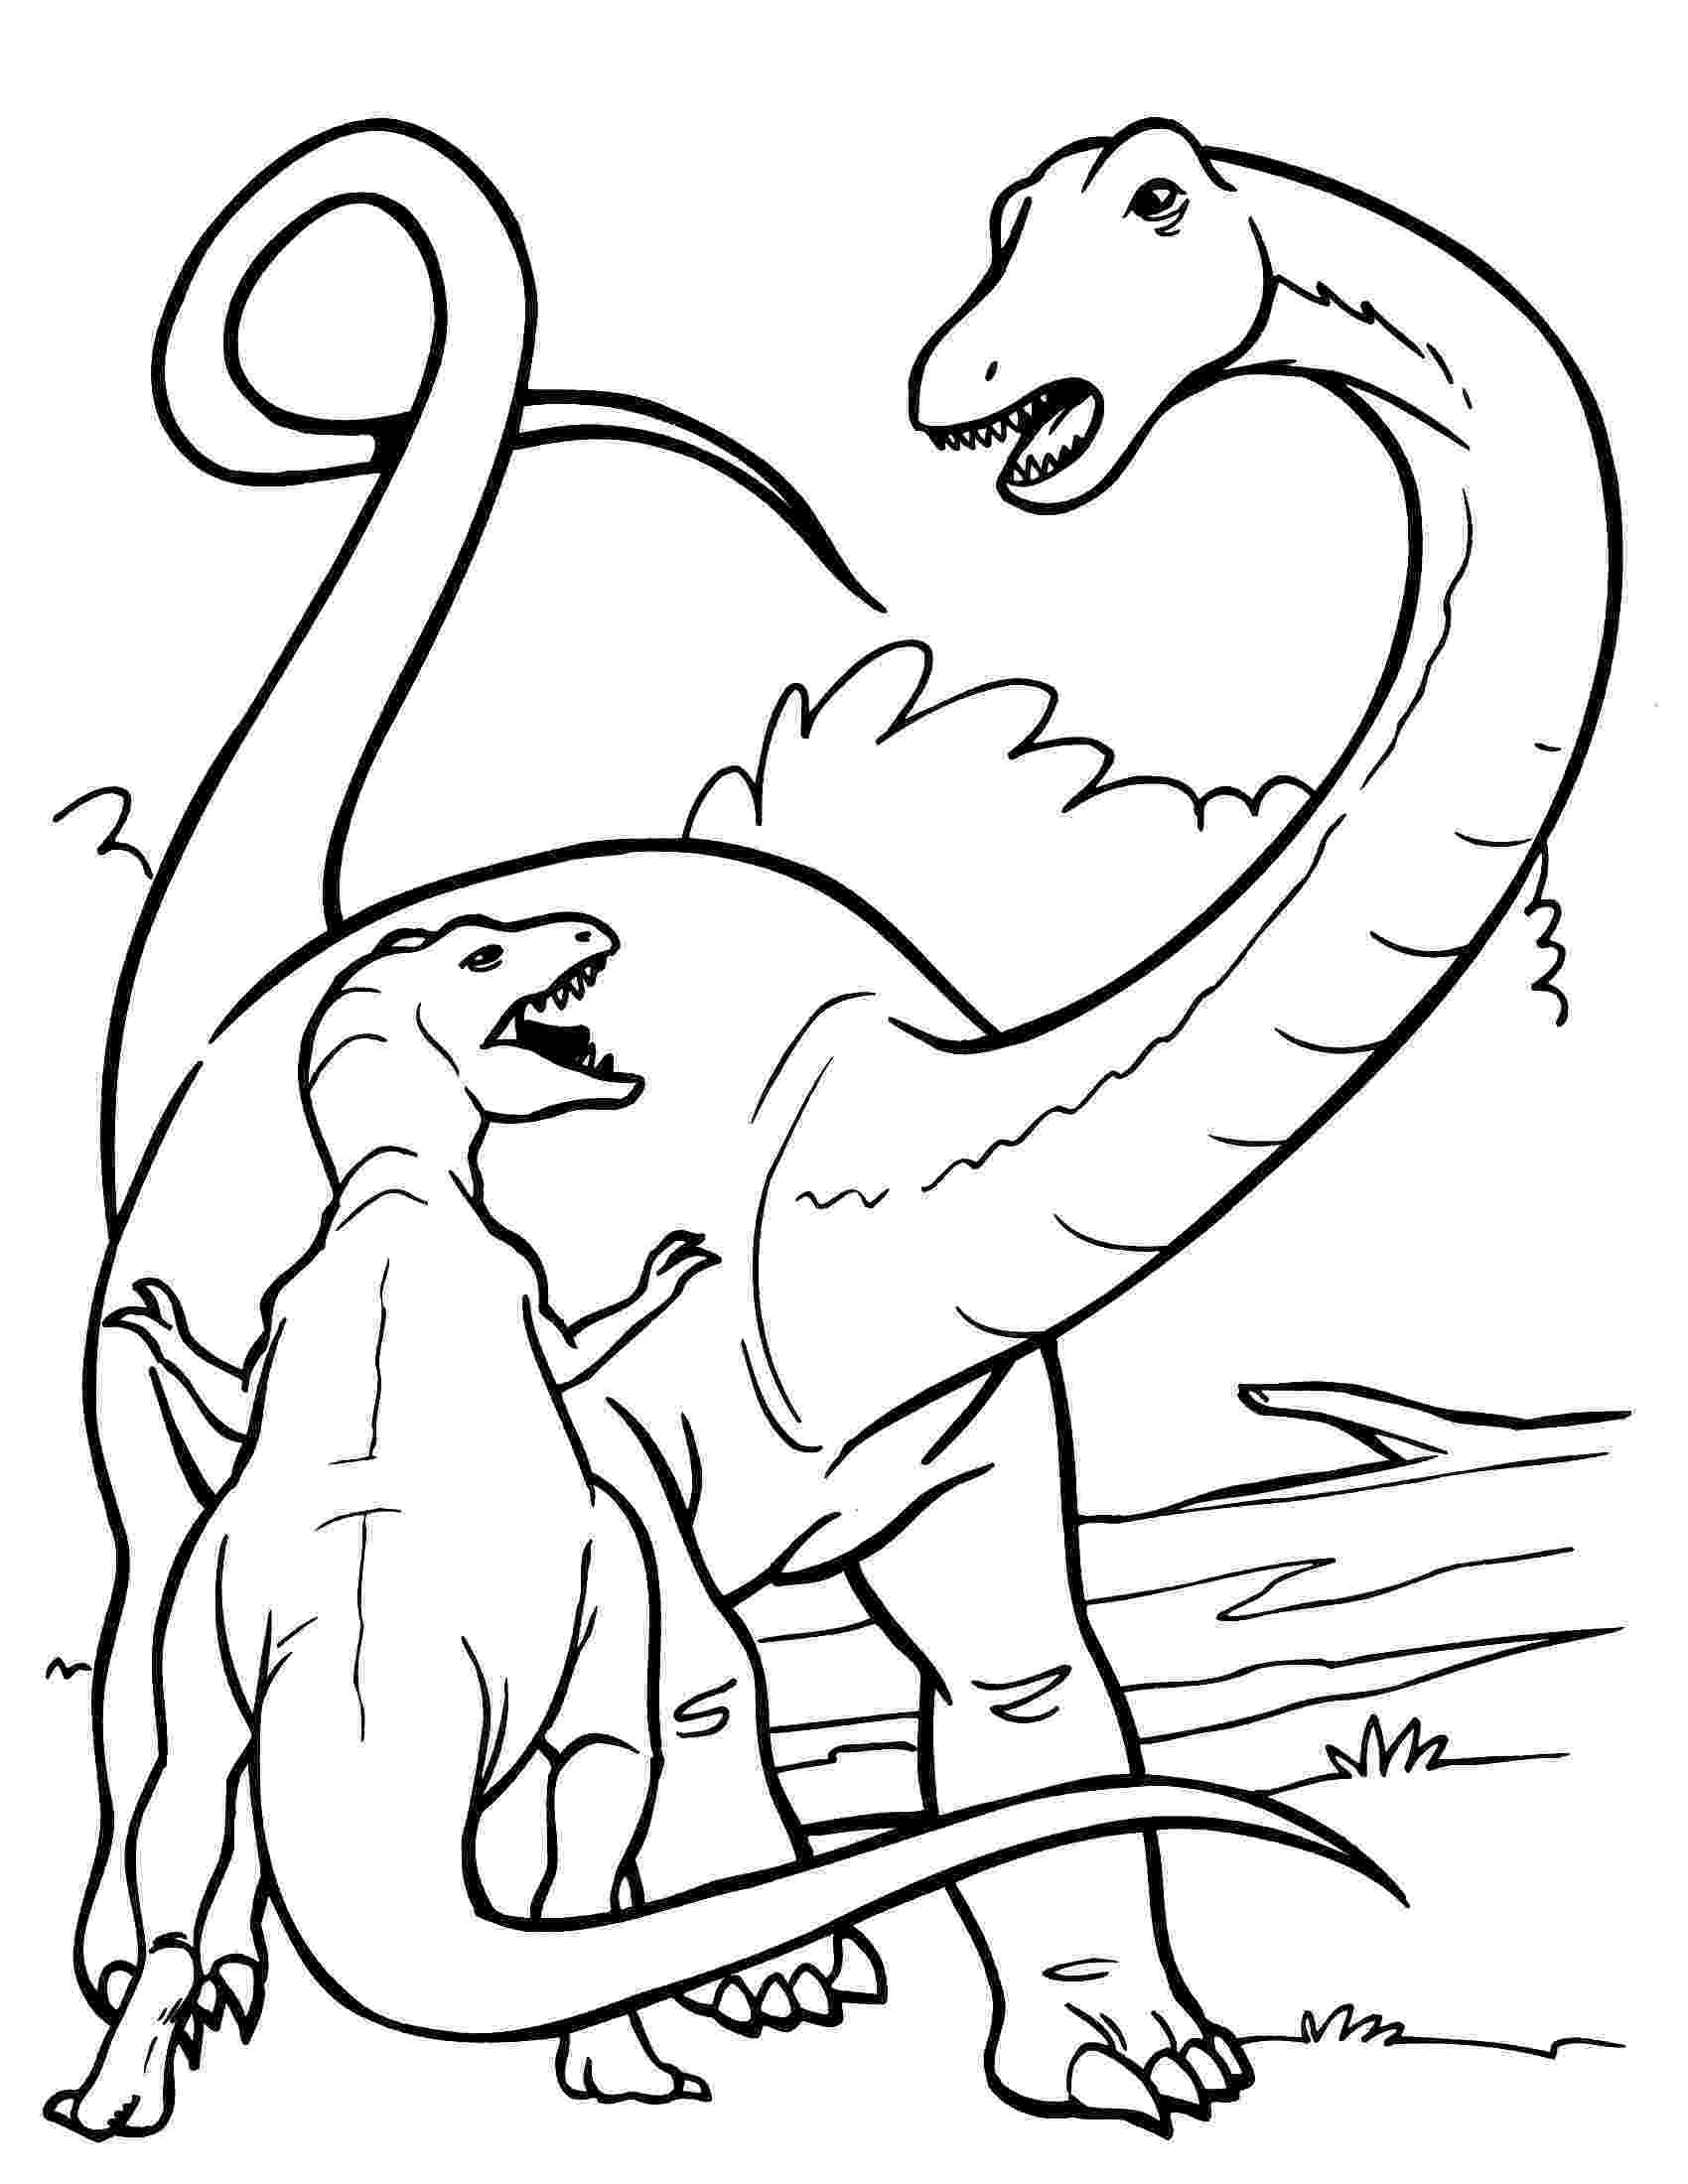 dinosuar coloring pages baby dinosaur coloring pages to download and print for free pages dinosuar coloring 